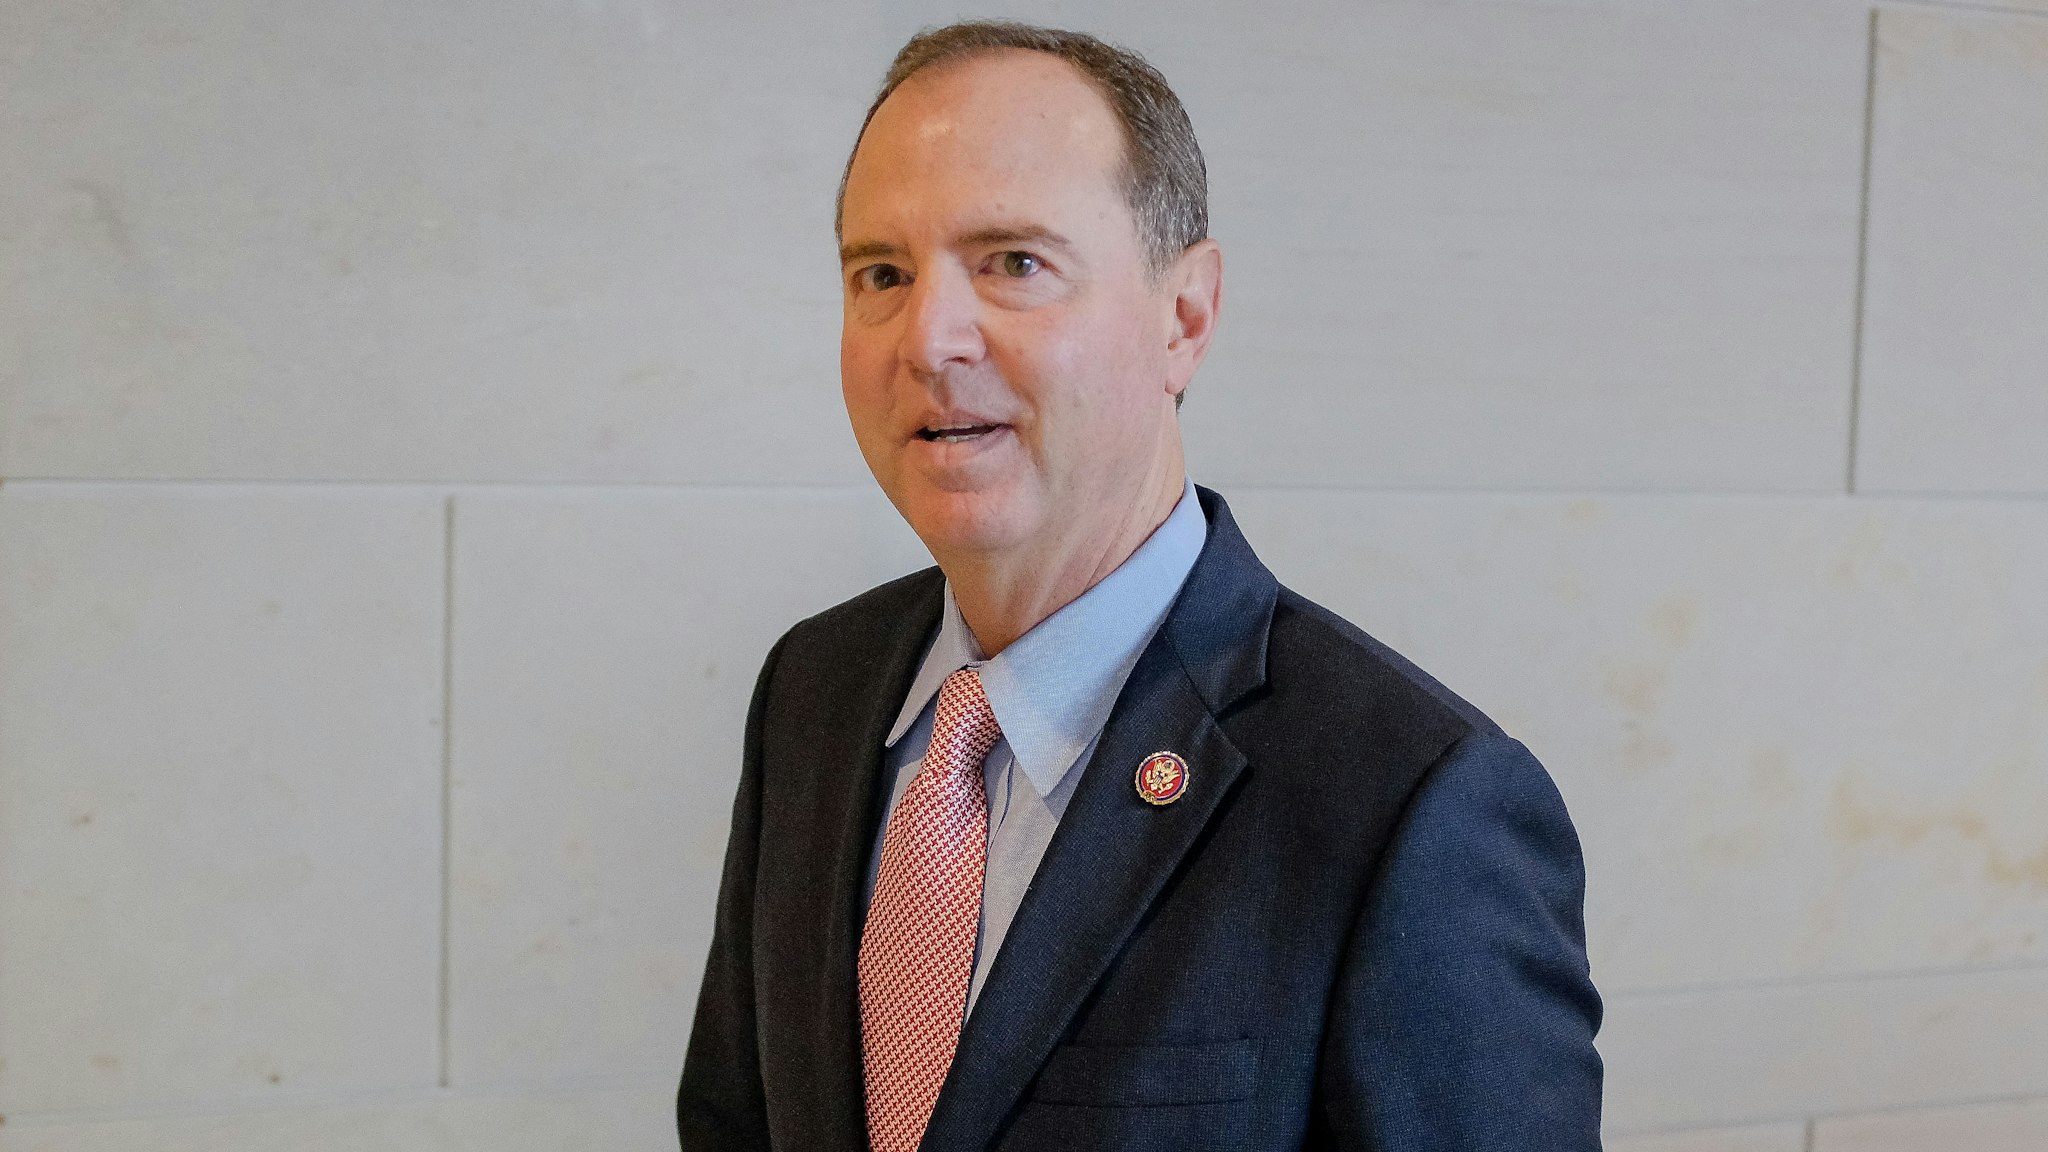 Representative Adam Schiff, a Democrat from California and chairman of the House Intelligence Committee, arrives on Capitol Hill in Washington, D.C., U.S., on Friday, Oct. 11, 2019. Marie Yovanovitch, the former U.S. ambassador to Ukraine, arrived to give a private deposition to three House committees leading the impeachment inquiry.